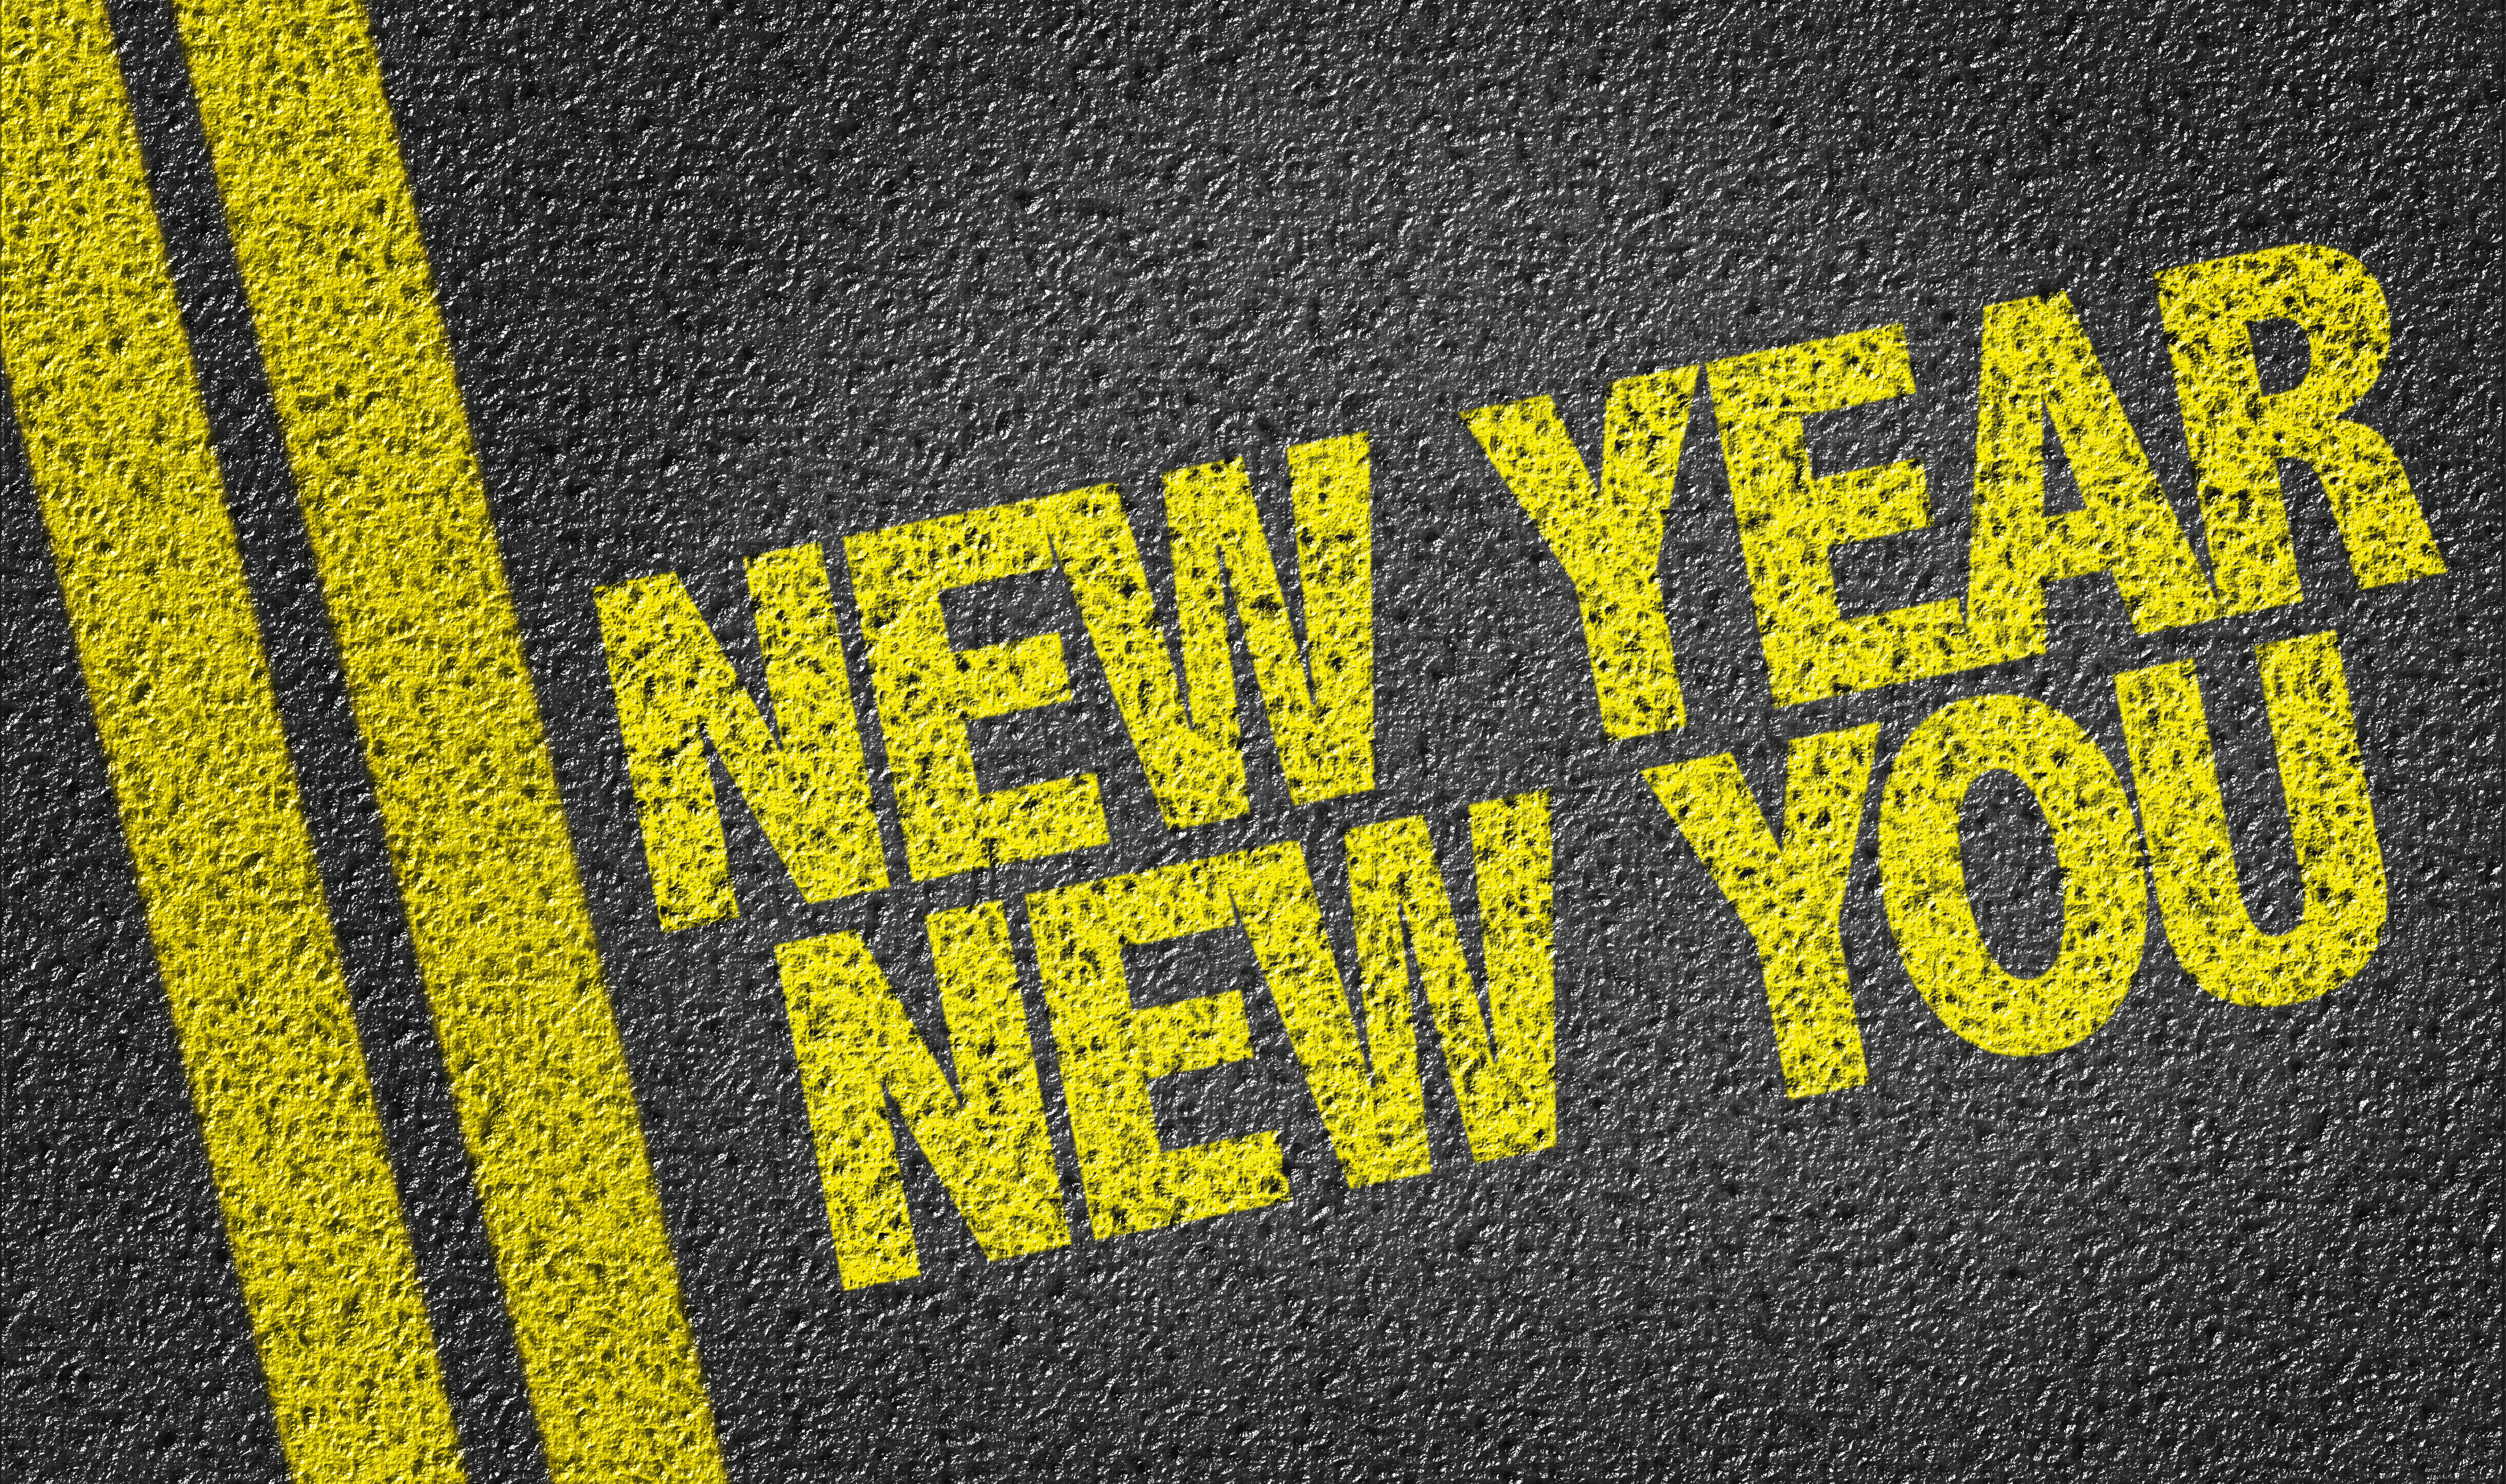 New Year New You written on the road